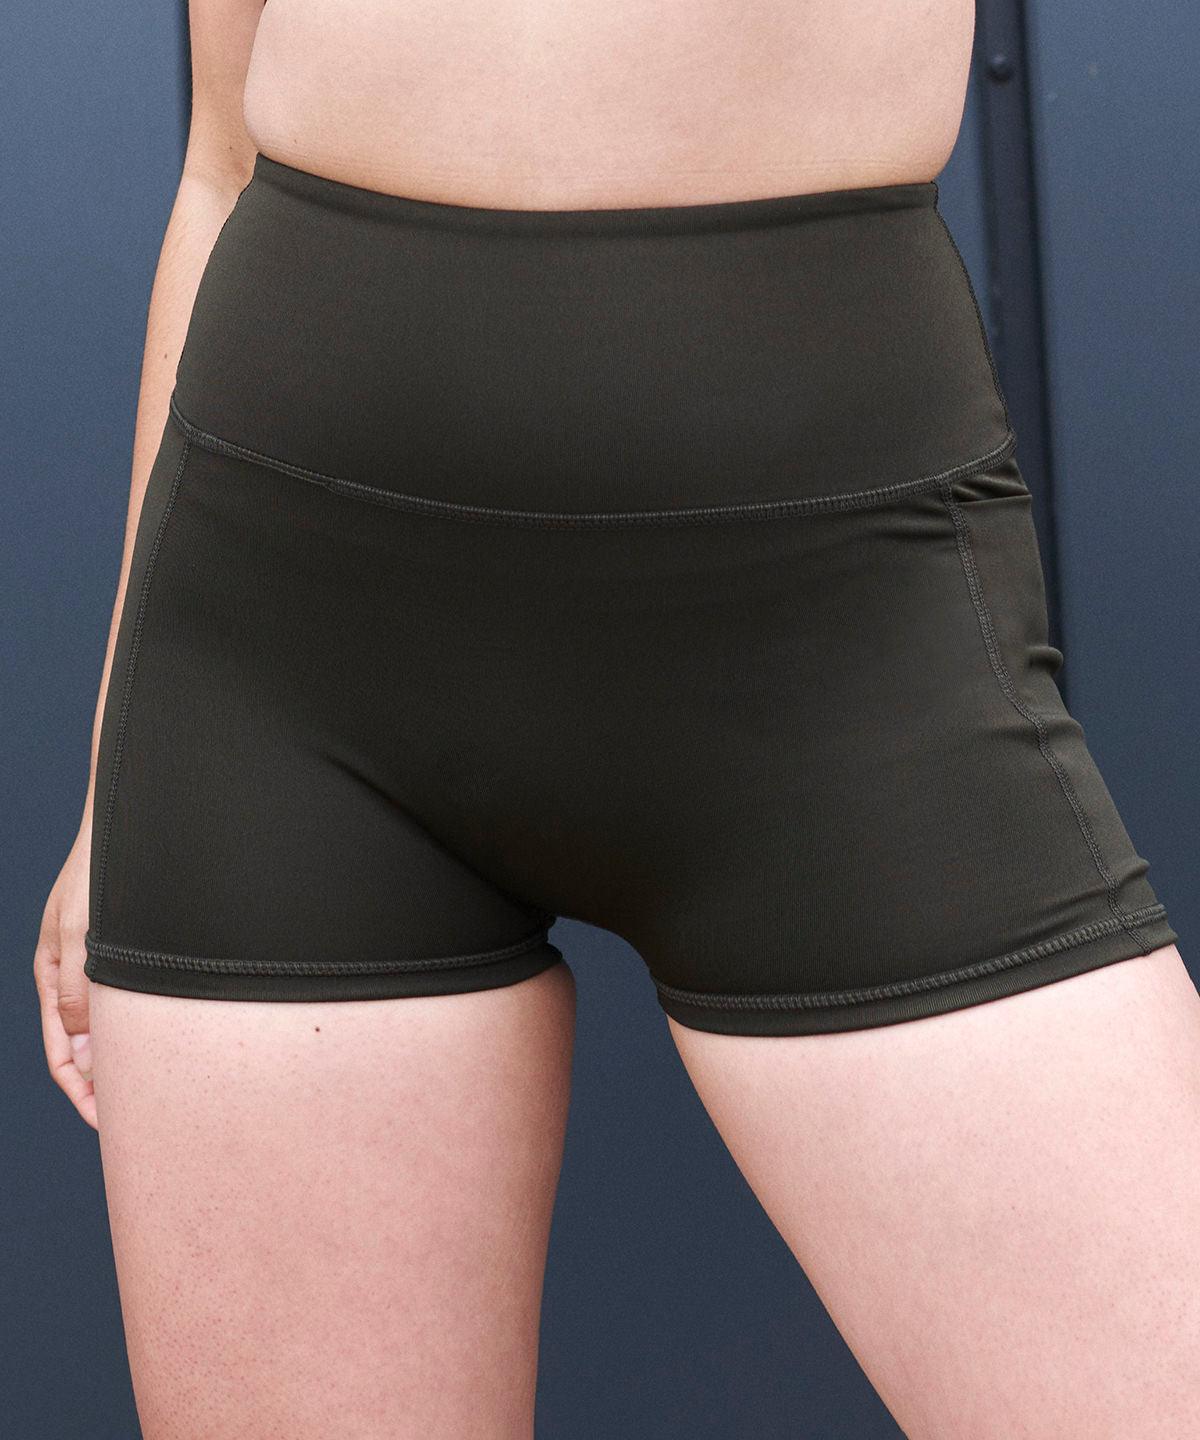 Olive Green - Pocket shorts Shorts Tombo Activewear & Performance, Back to the Gym, New Styles For 2022, On-Trend Activewear, Trousers & Shorts, Women's Fashion Schoolwear Centres